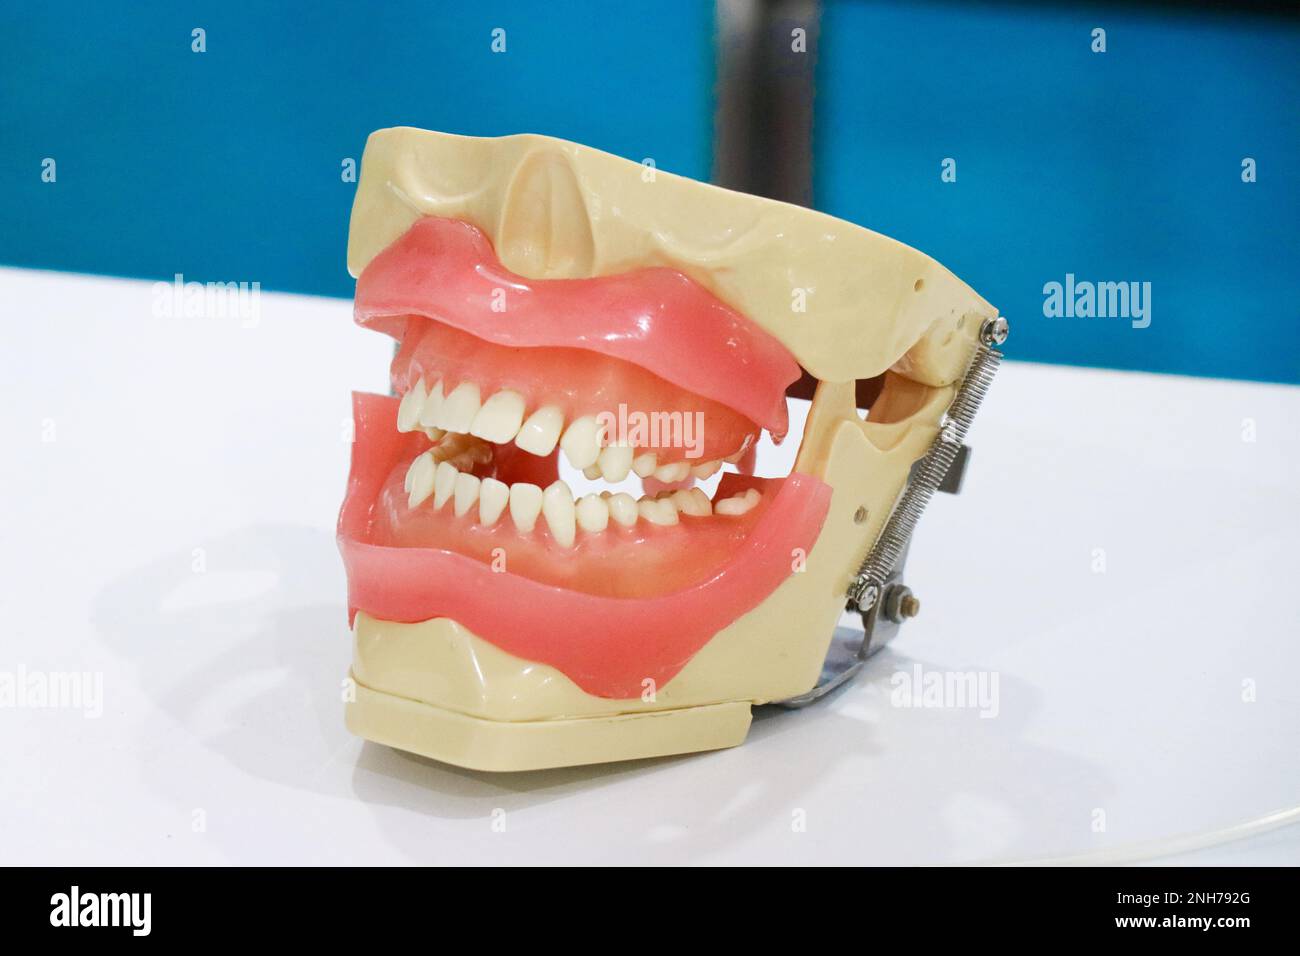 Jaw teeth or human jaw model with a view of teeth. Prosthetic model for educational purpose Stock Photo